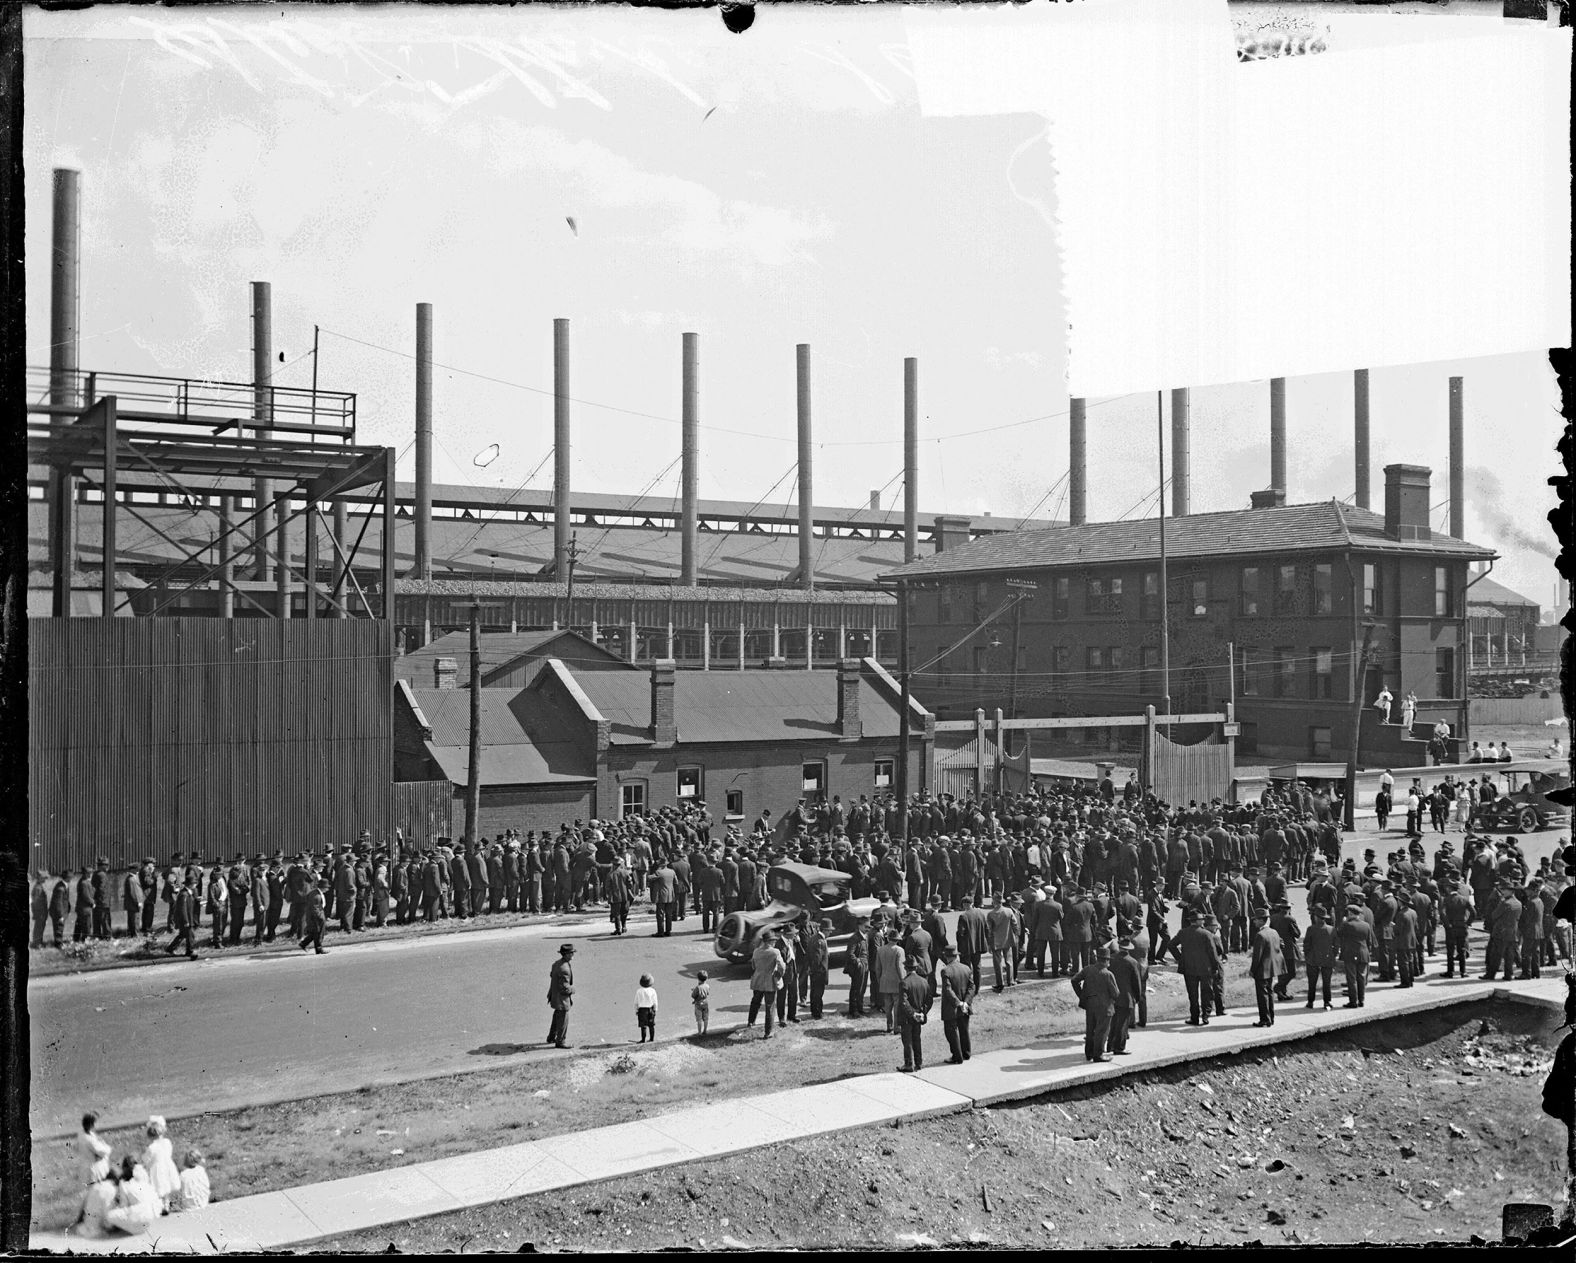 Workers strike outside the US Steel plant in Gary, Indiana, in 1919.